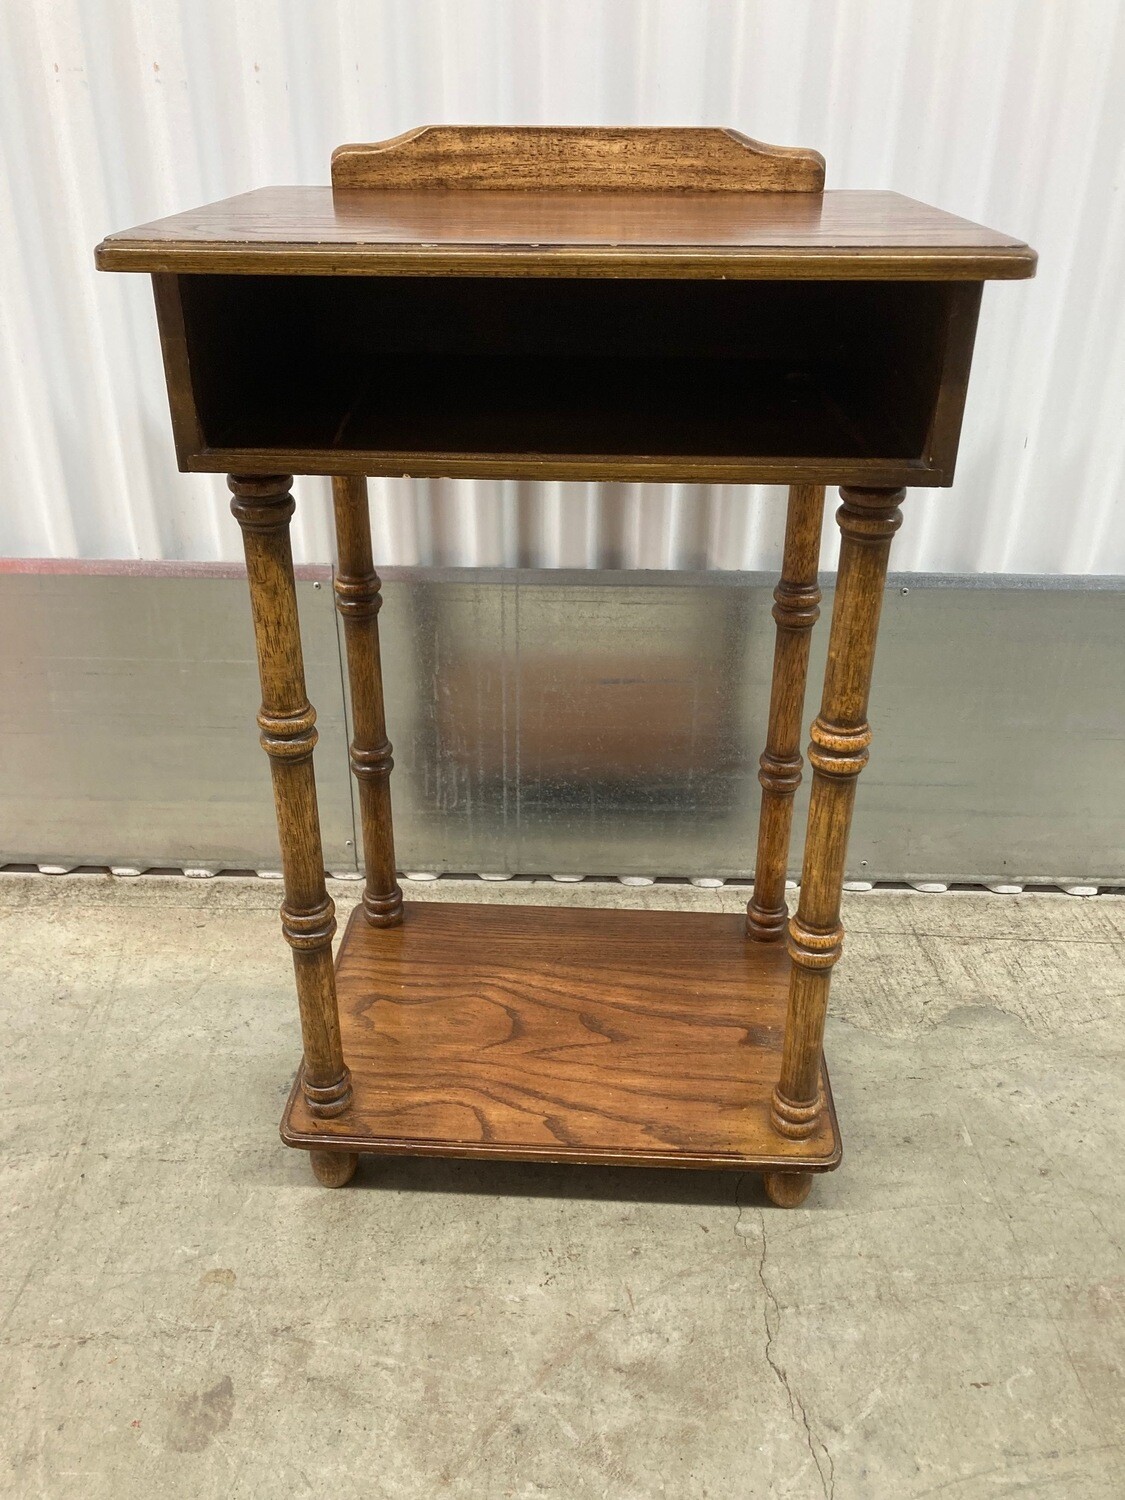 Antique-looking Oak "Telephone Table" #2103